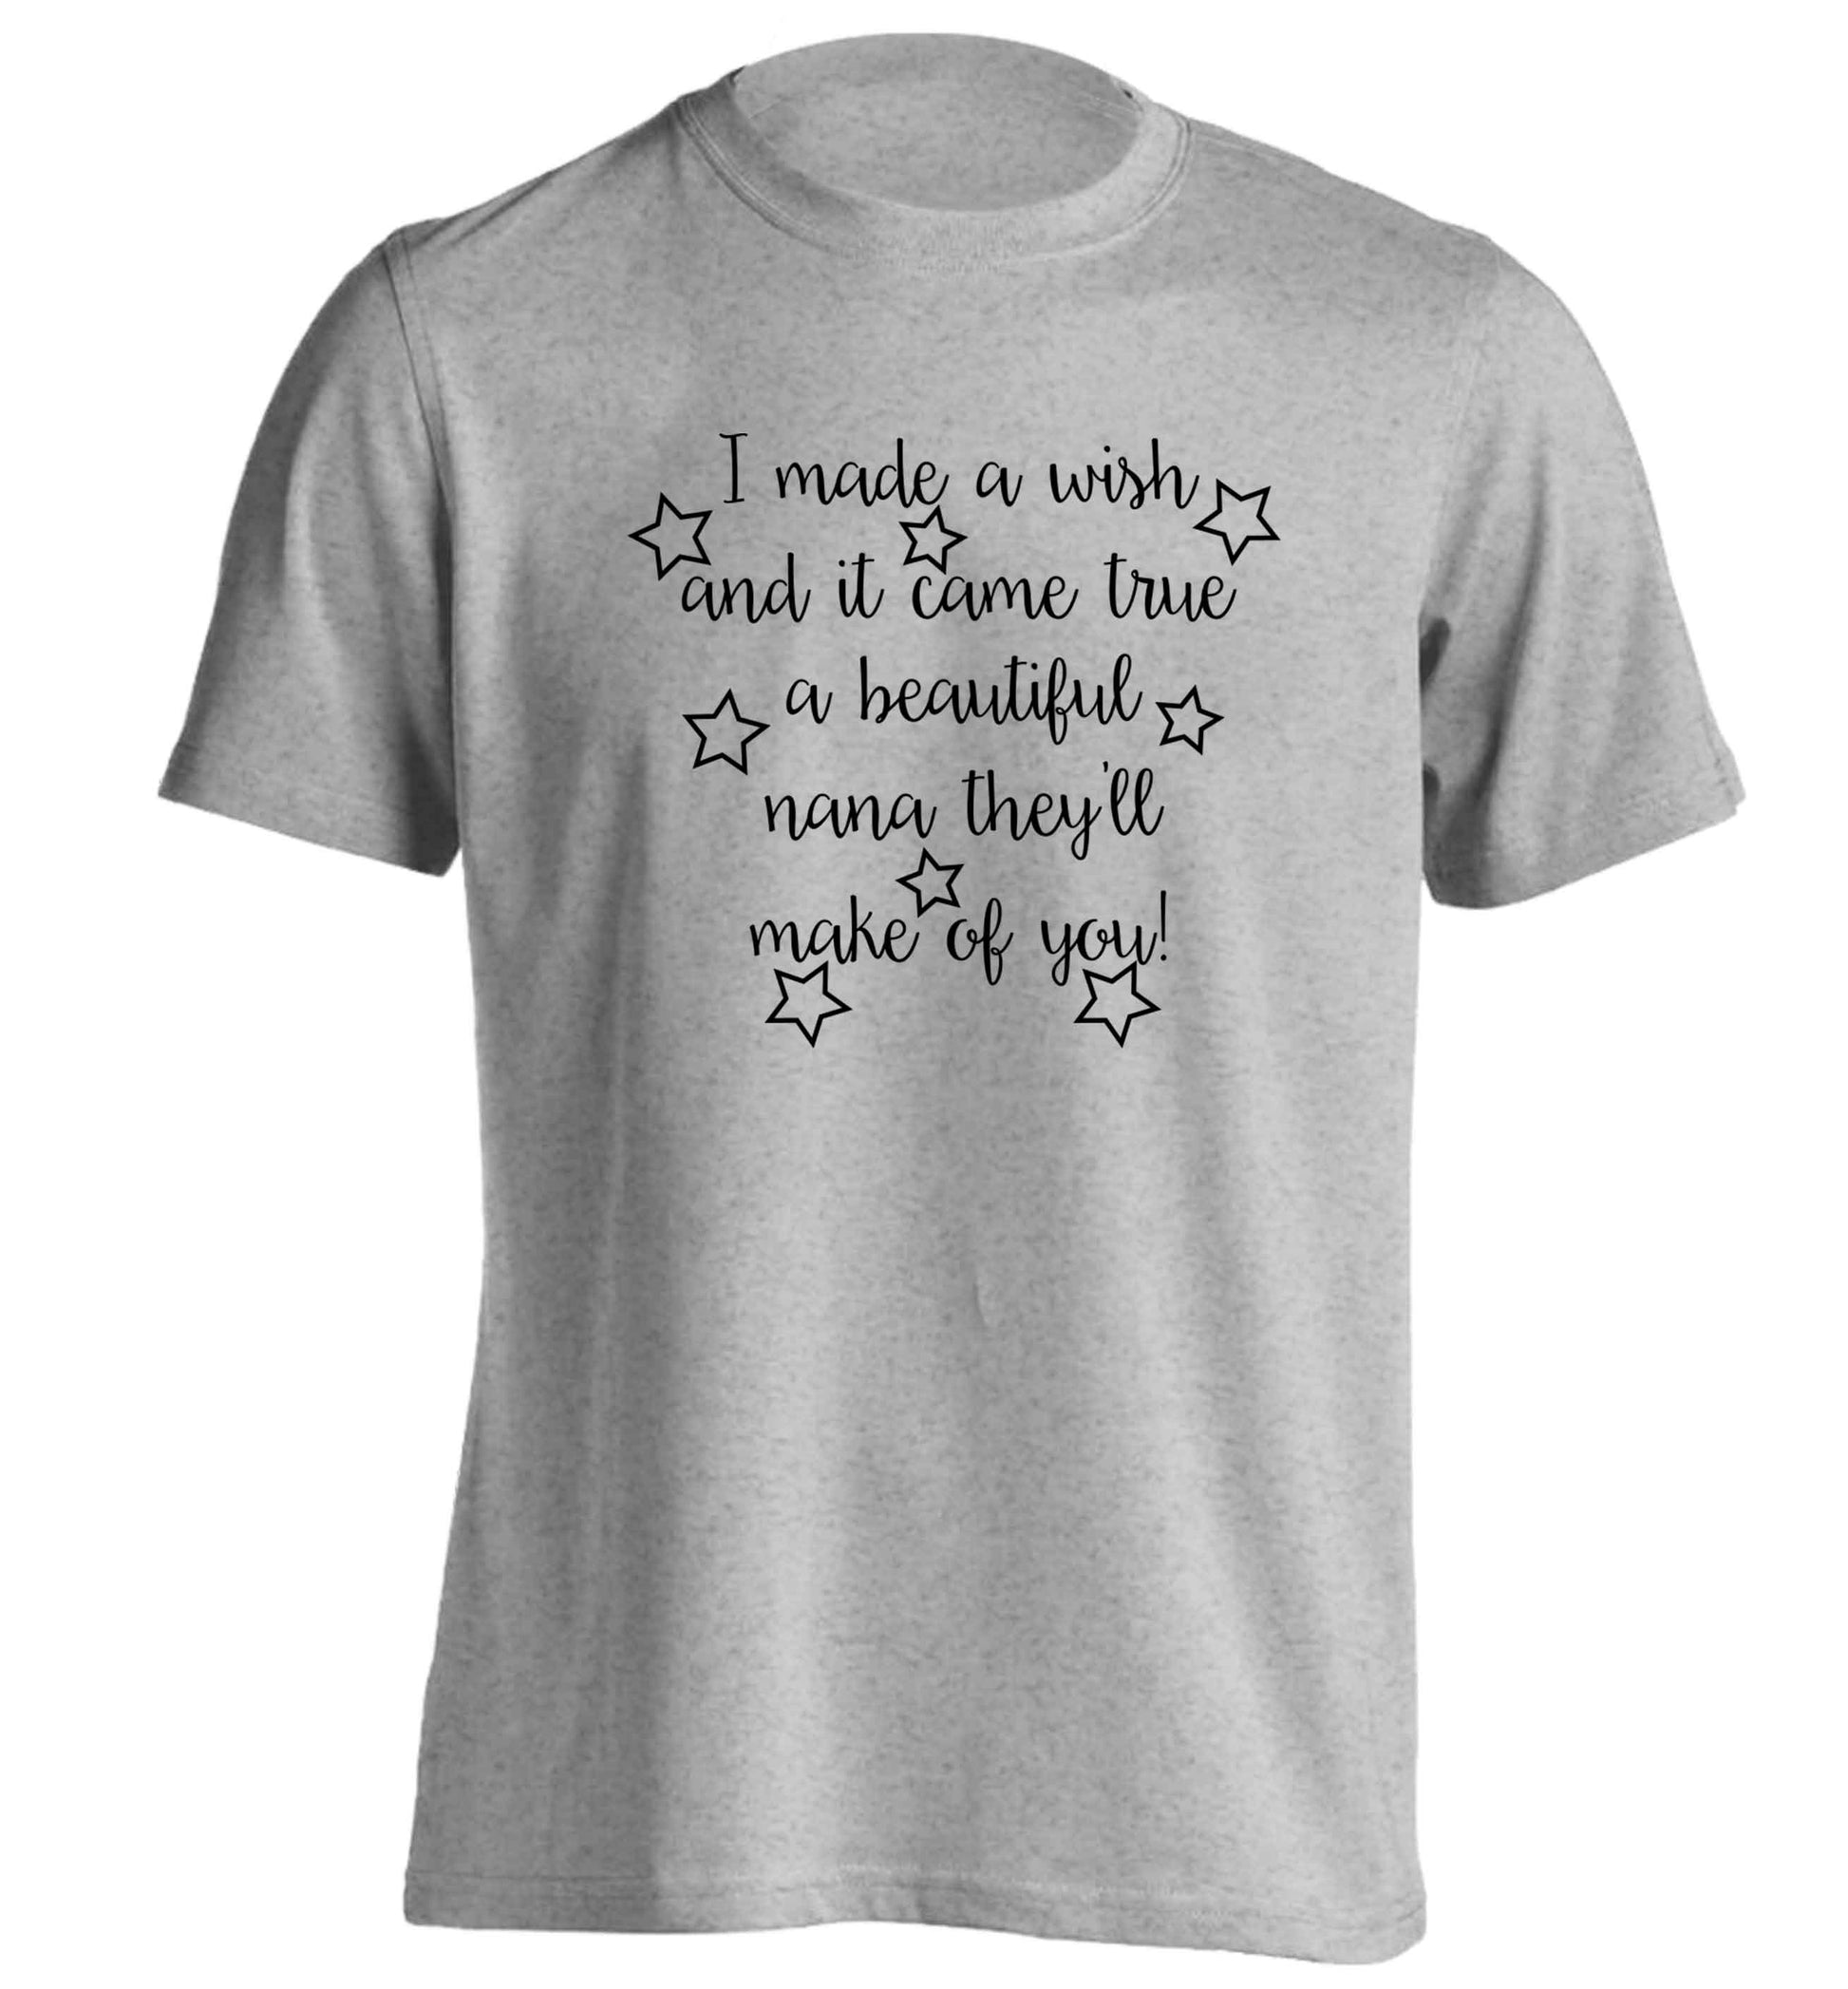 I made a wish and it came true a beautiful nana they'll make of you! adults unisex grey Tshirt 2XL